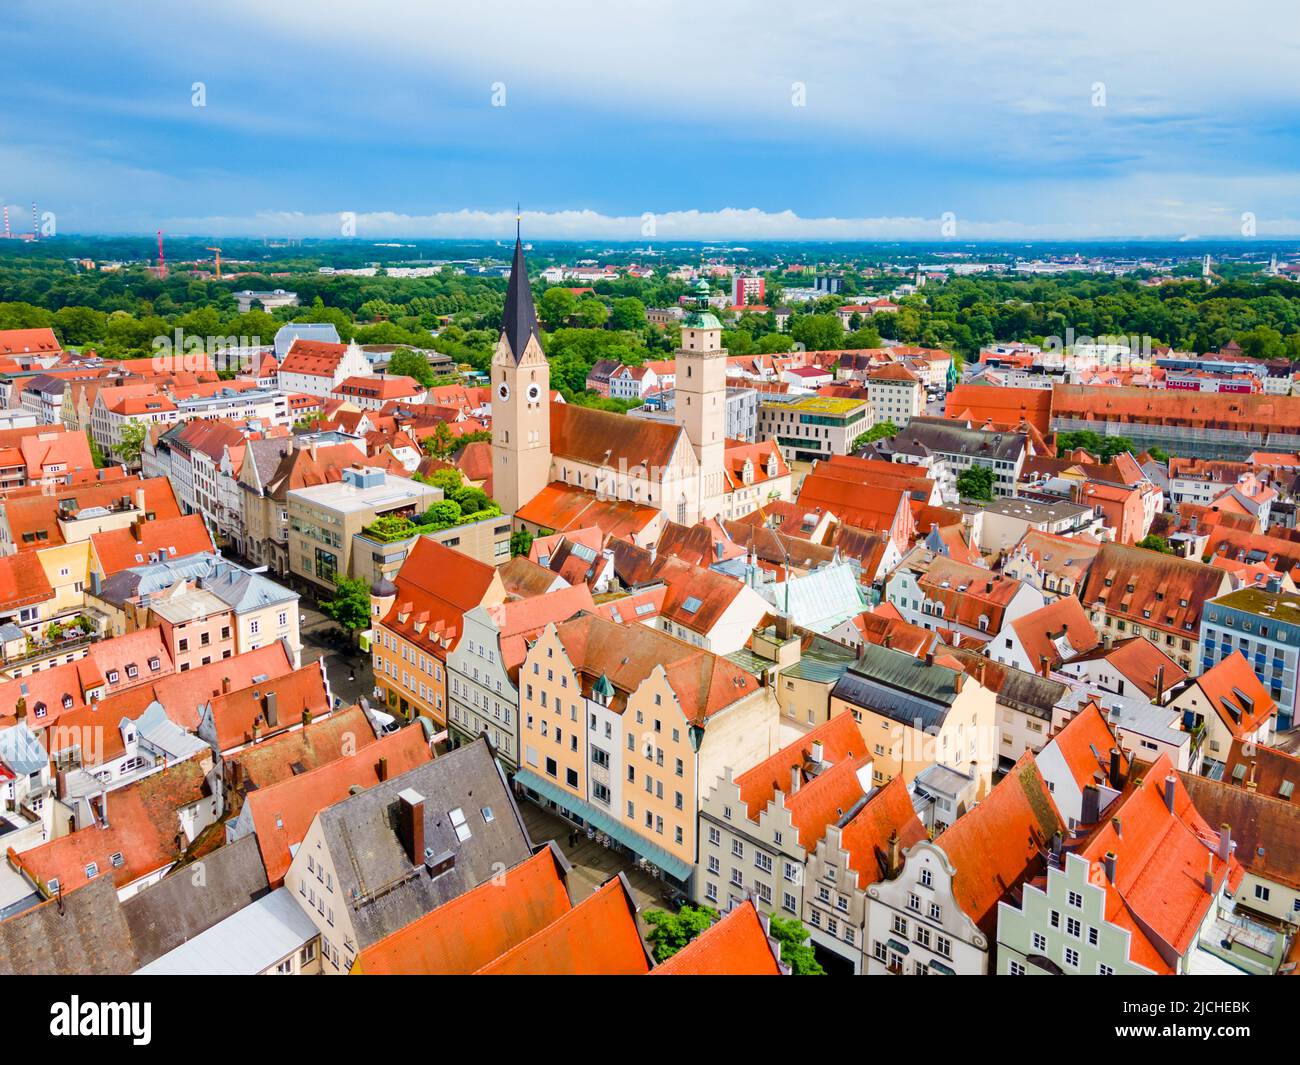 Ingolstadt old town aerial panoramic view. Ingolstadt is a city in Bavaria, Germany. Stock Photo